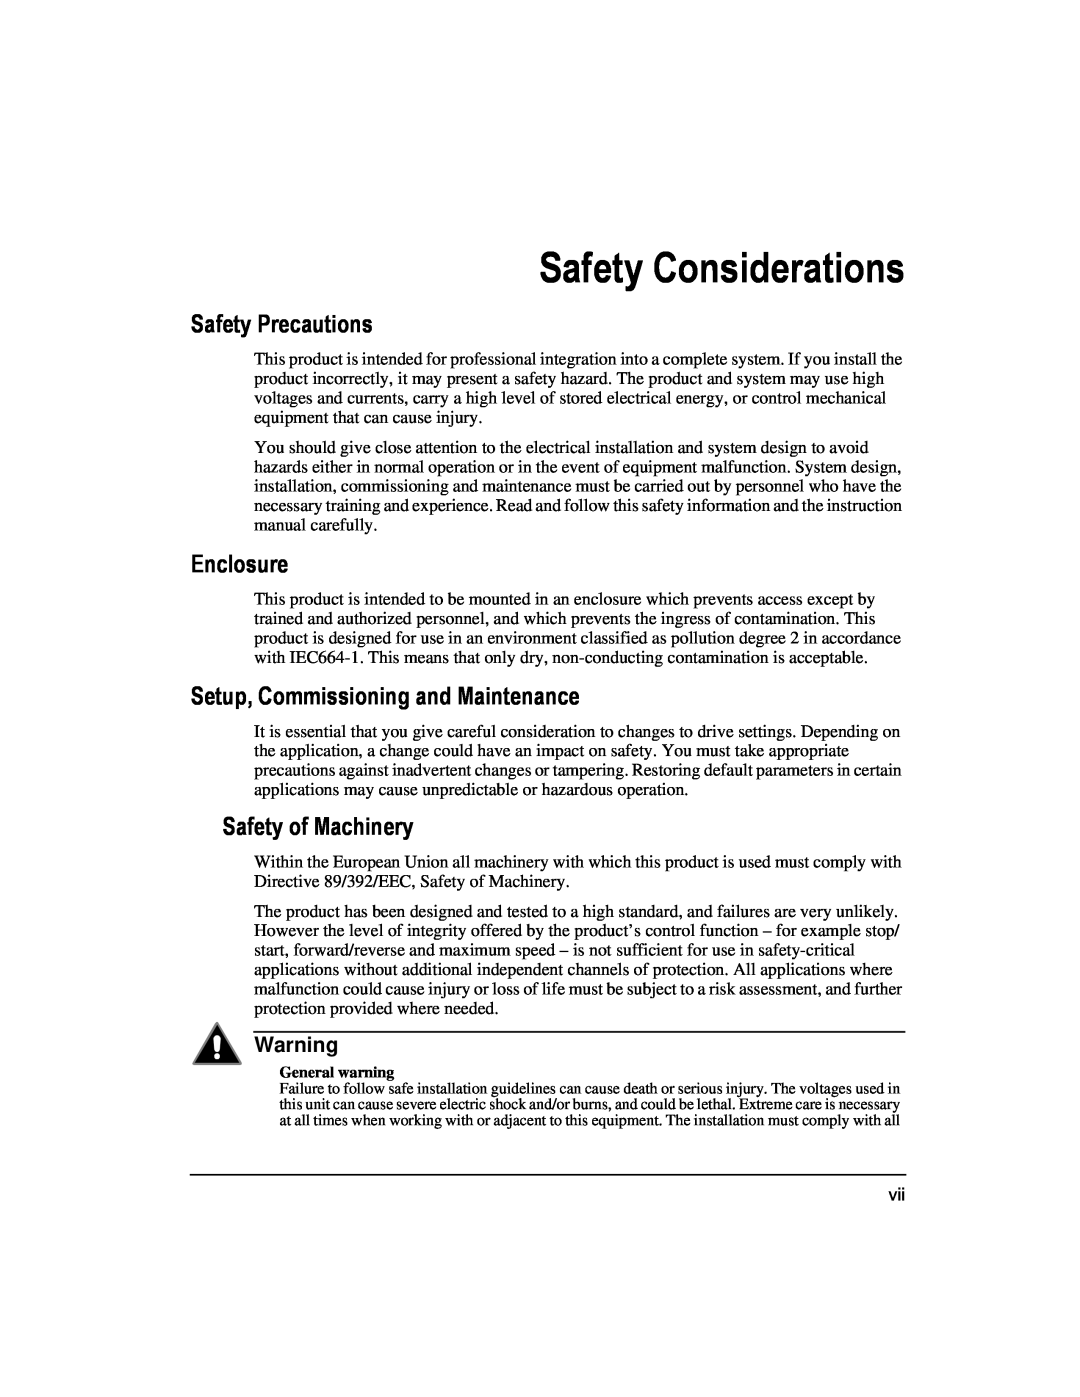 Emerson 400508-02 Safety Considerations, Safety Precautions, Enclosure, Setup, Commissioning and Maintenance 